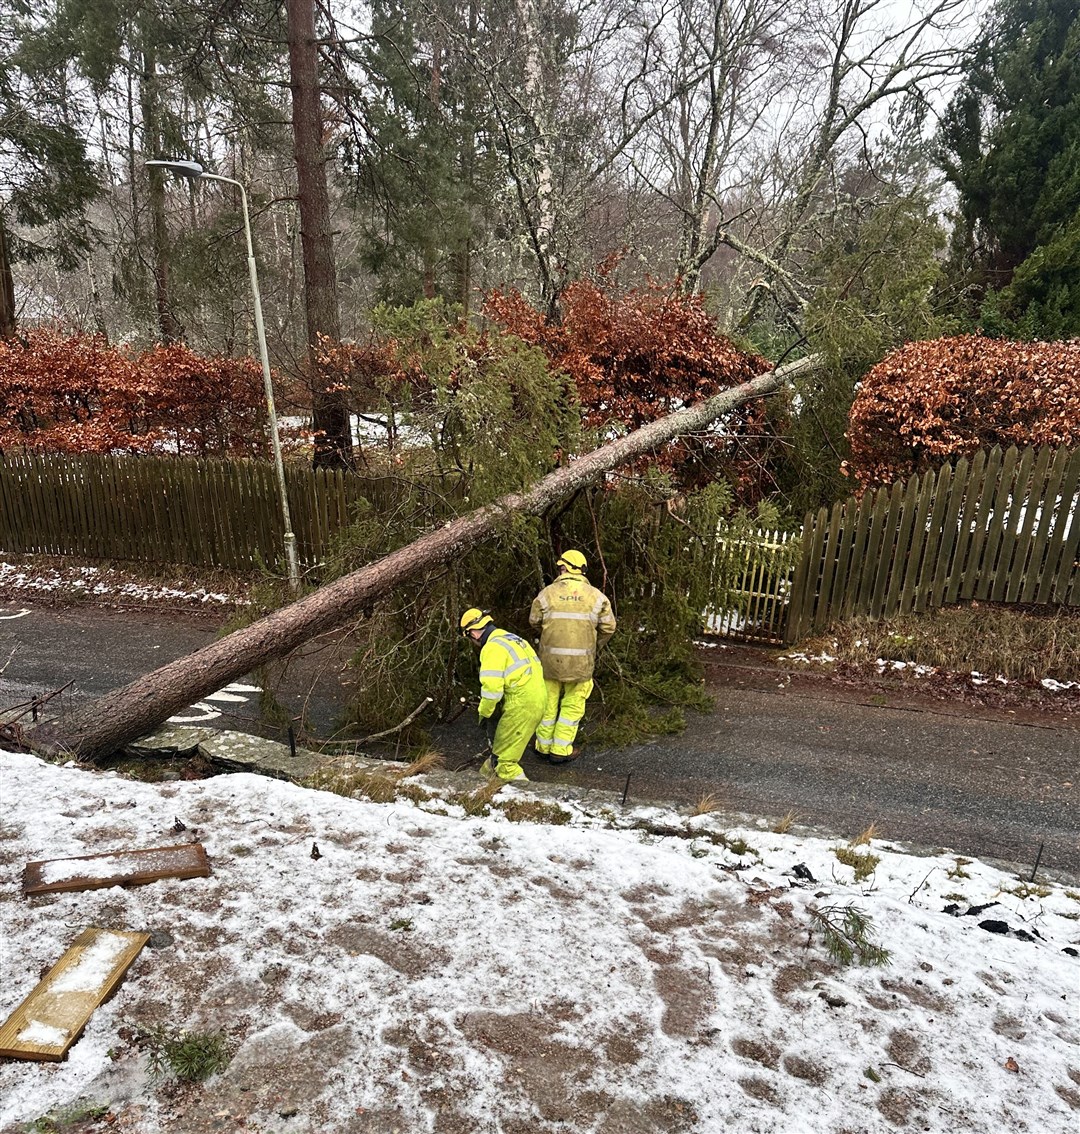 Kincraig: a passing connectivity team got straight to work to clear their own way on The Brae en route to helping those whose power had been cut off in the remoter districts